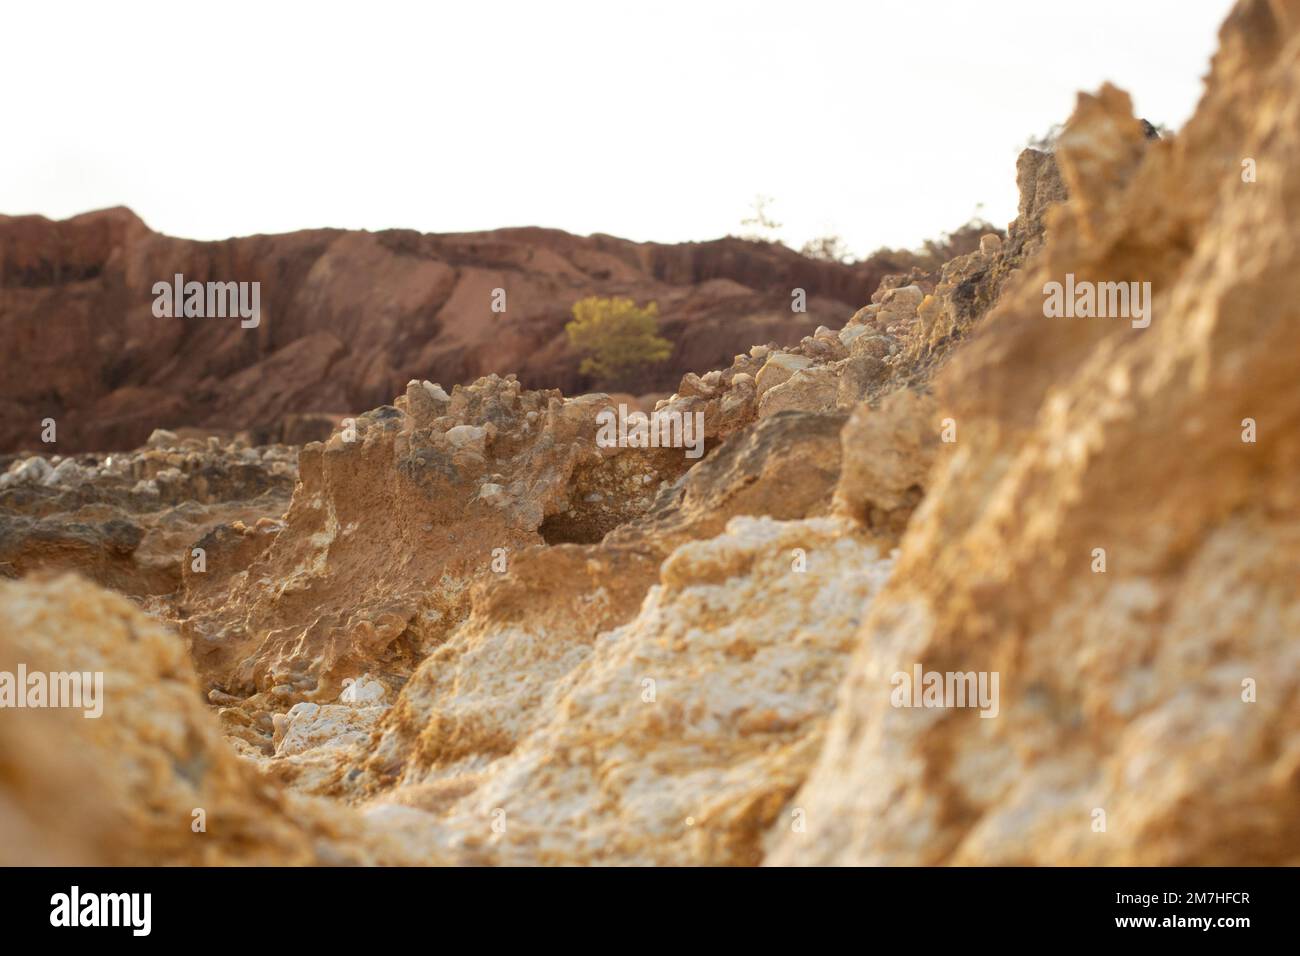 scene around the deserted land due to deforestation and earth mining. Stock Photo